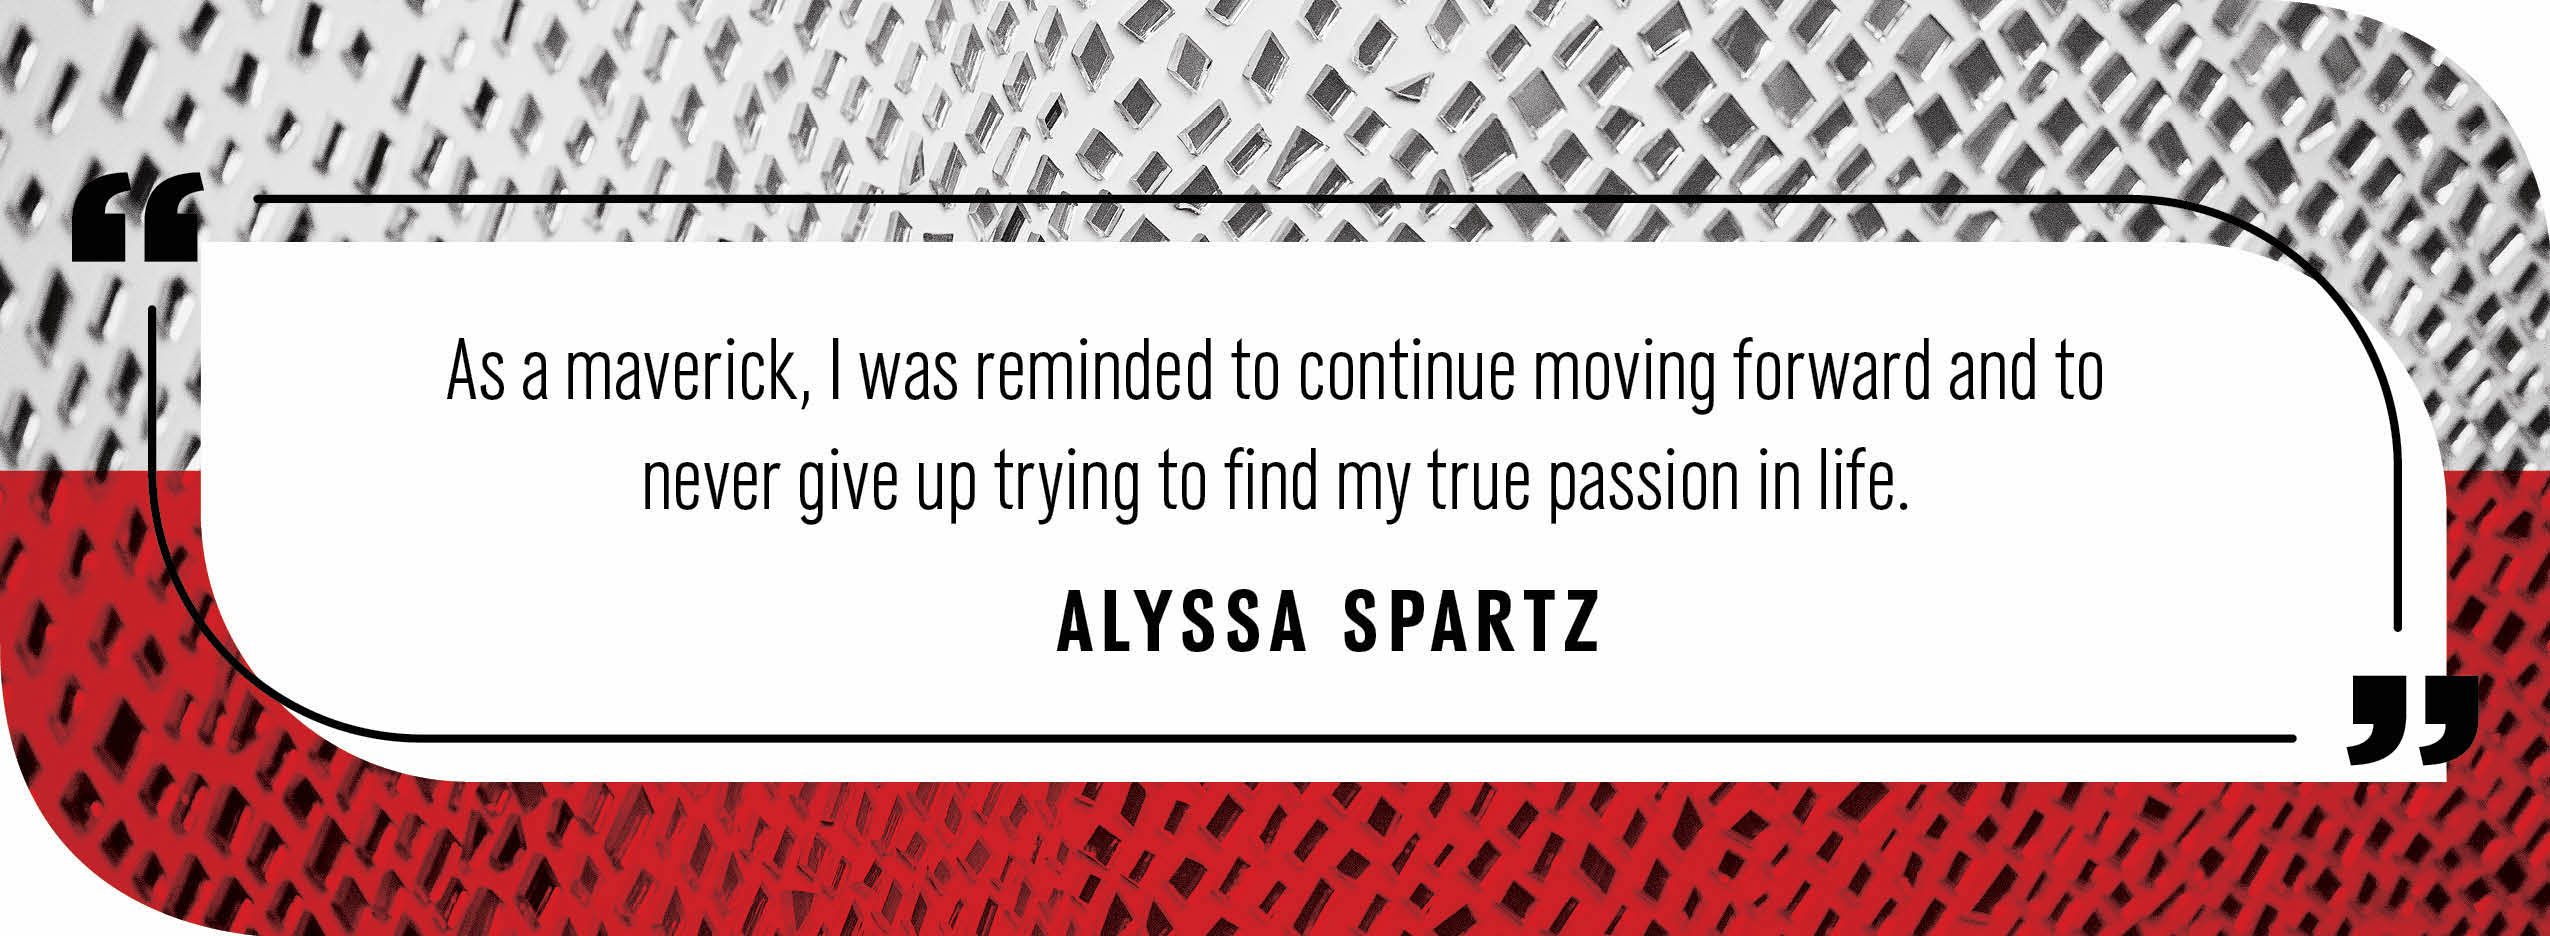 Quote by Alyssa Spartz: "As a maverick, I was reminded to continue moving forward and to never give up trying to find my true passion in life."